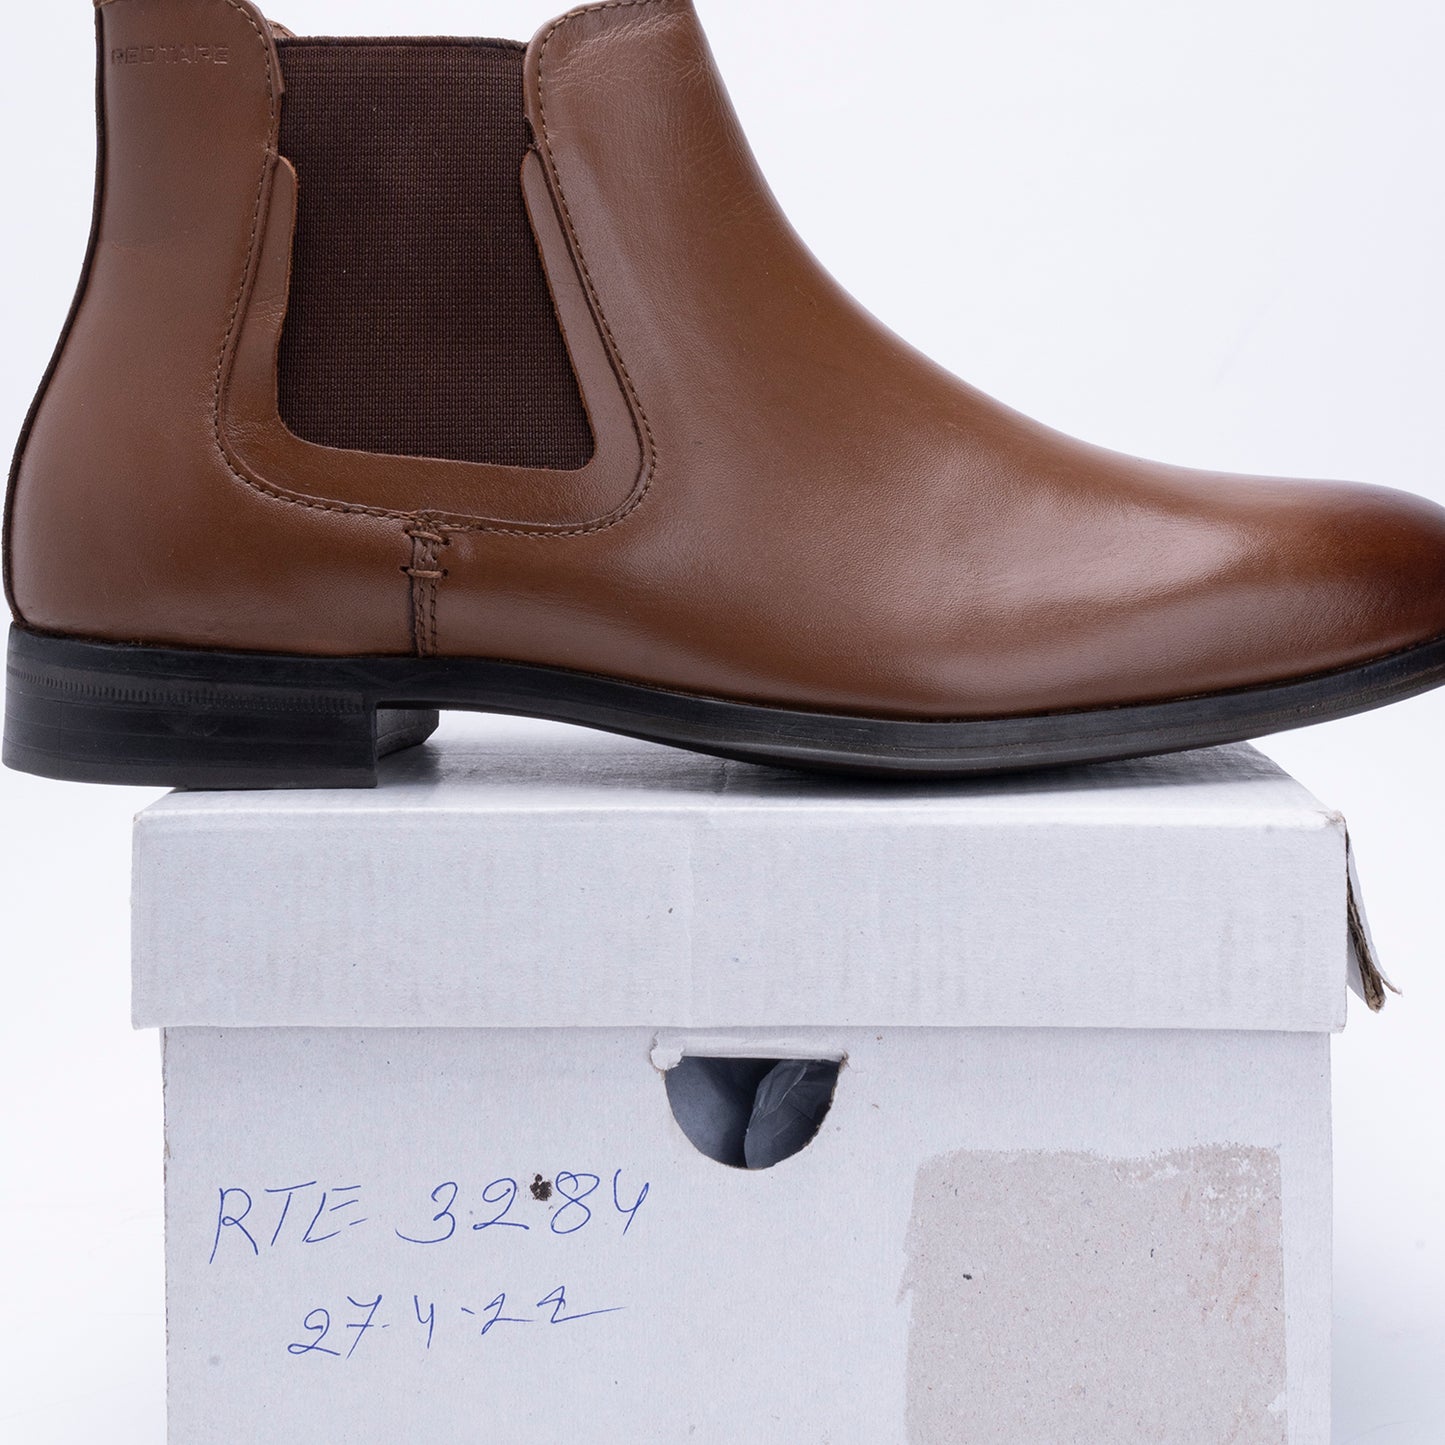 RedTape Men Tan Genuine Leather Ankle Length Boots